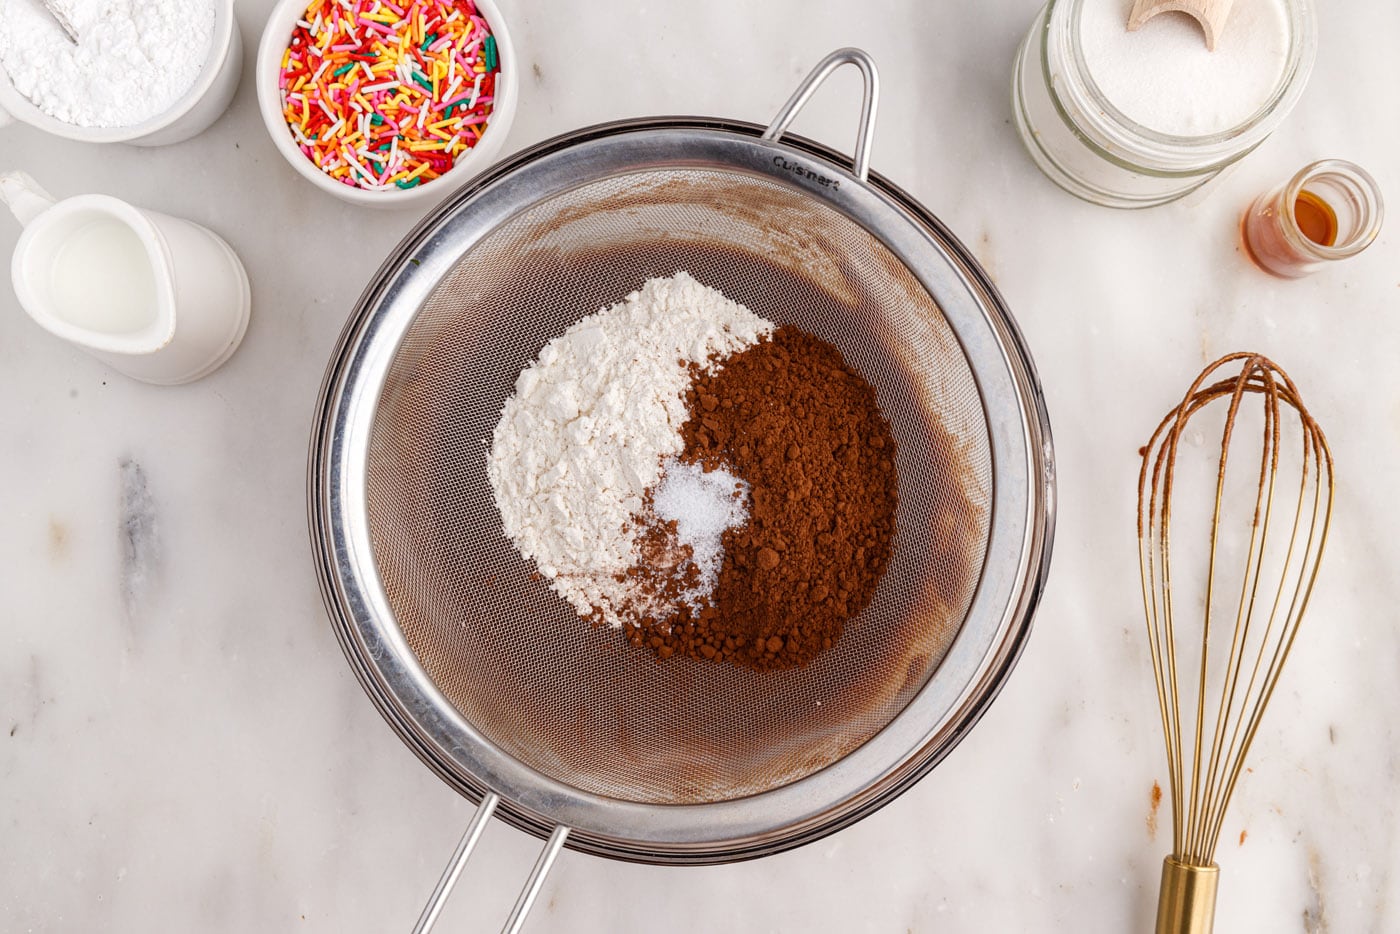 sifting flour, salt, and cocoa powder into donut batter